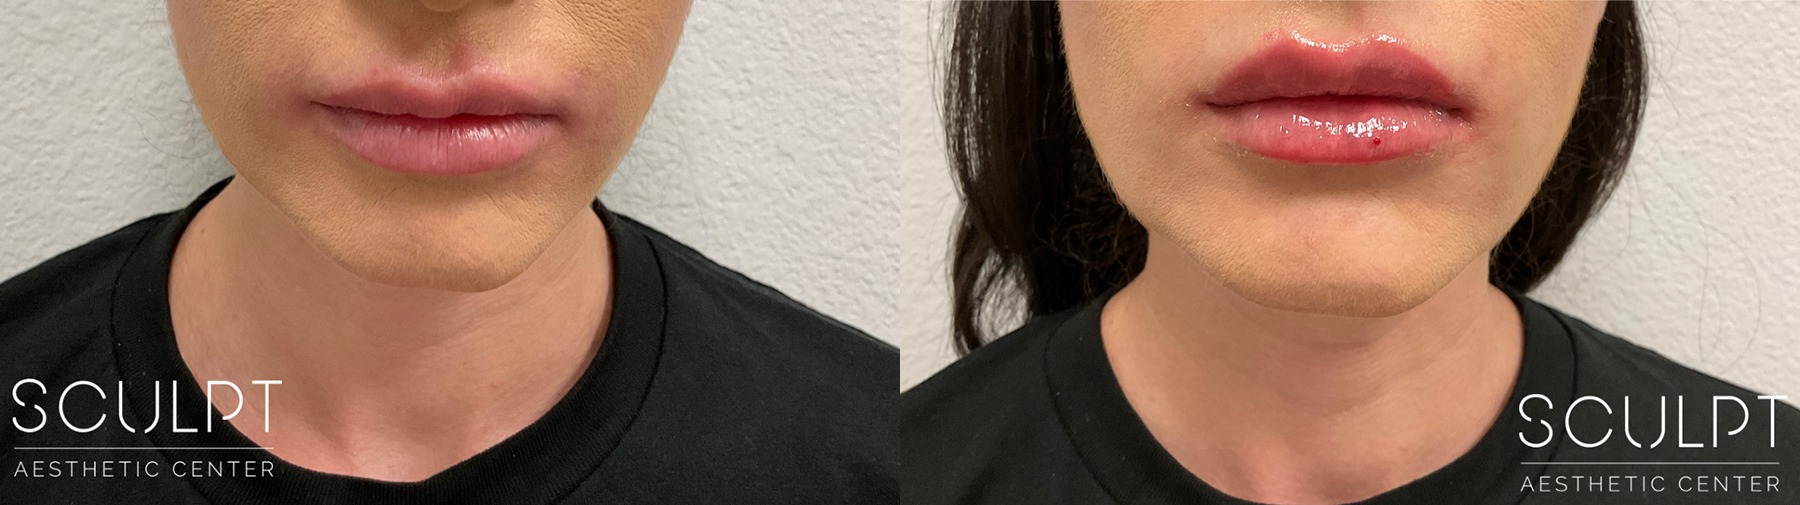 Lip Filler Before and After Photo by Sculpt Aesthetic Center in Frisco, TX